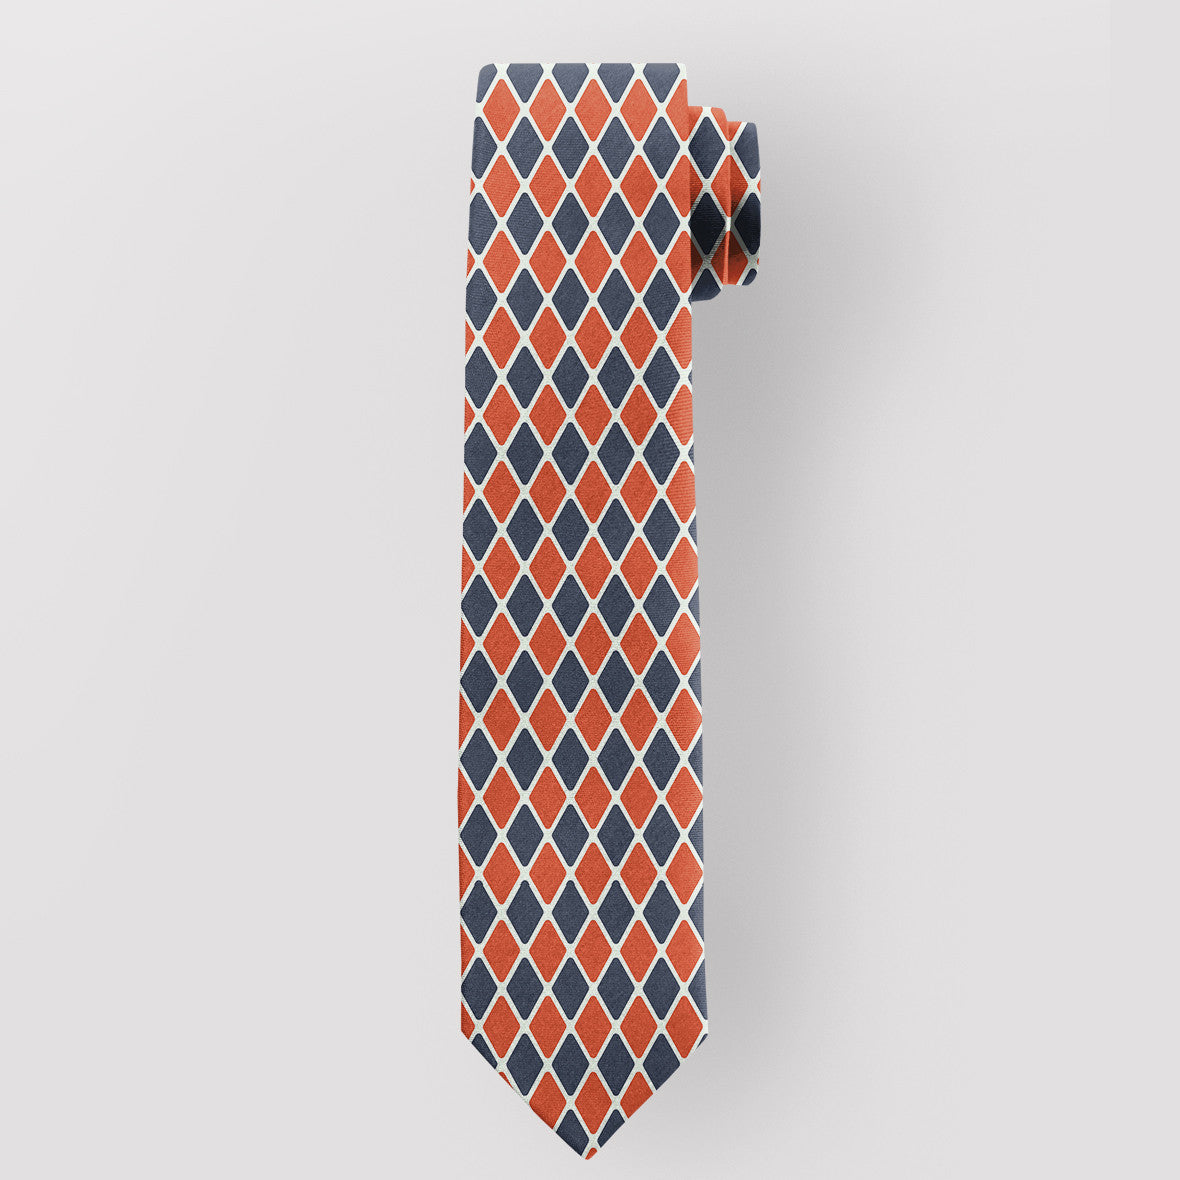 Download 11+ Neck Tie Mockup Free Background Yellowimages - Free ...